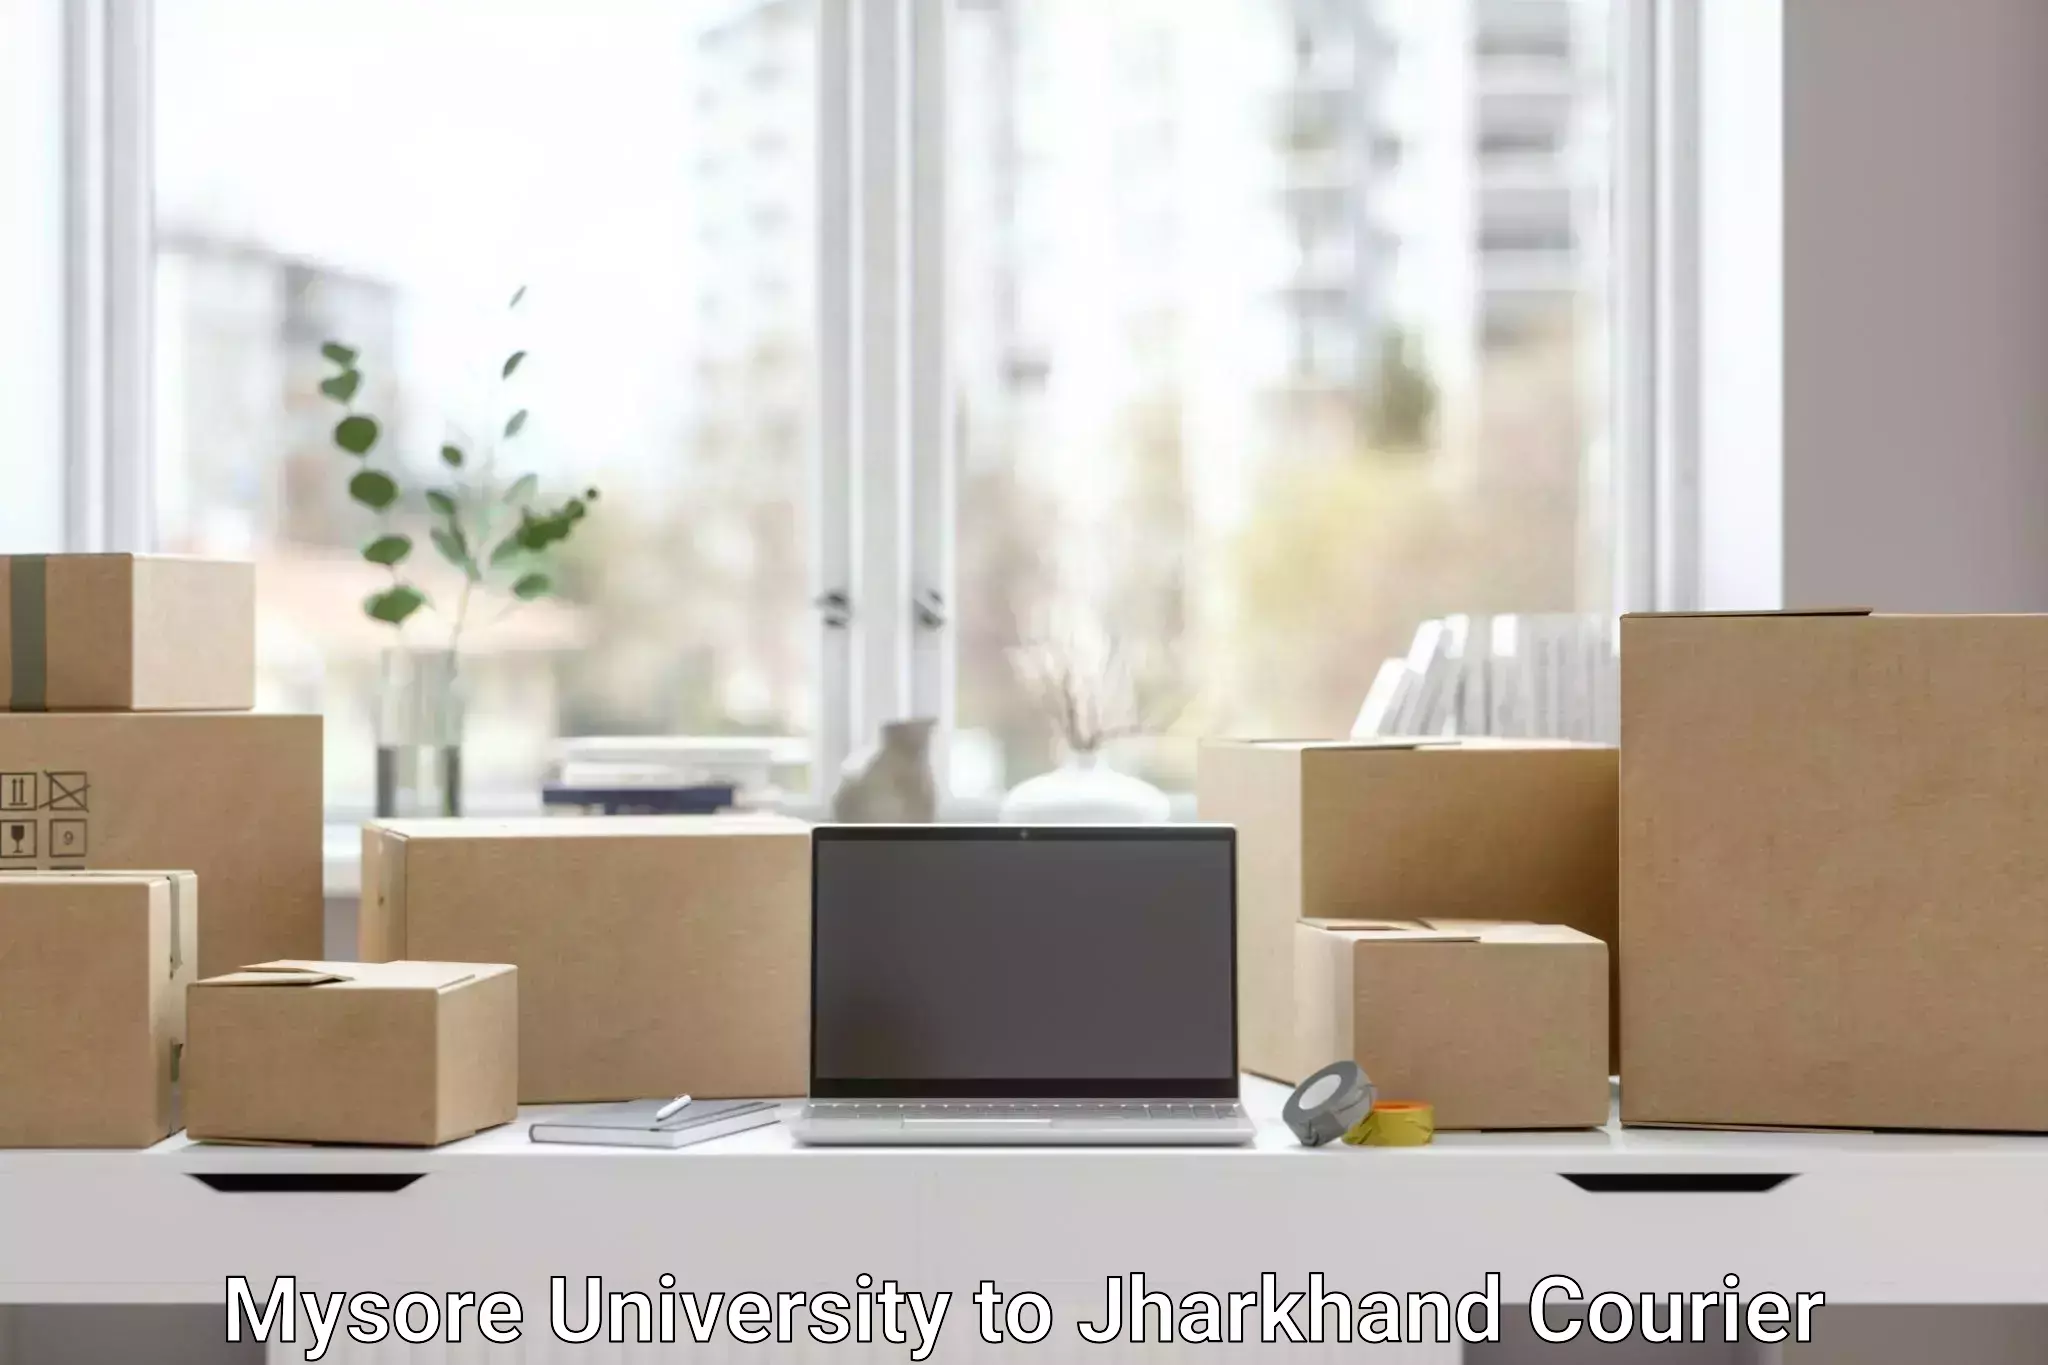 Nationwide shipping services Mysore University to Jharkhand